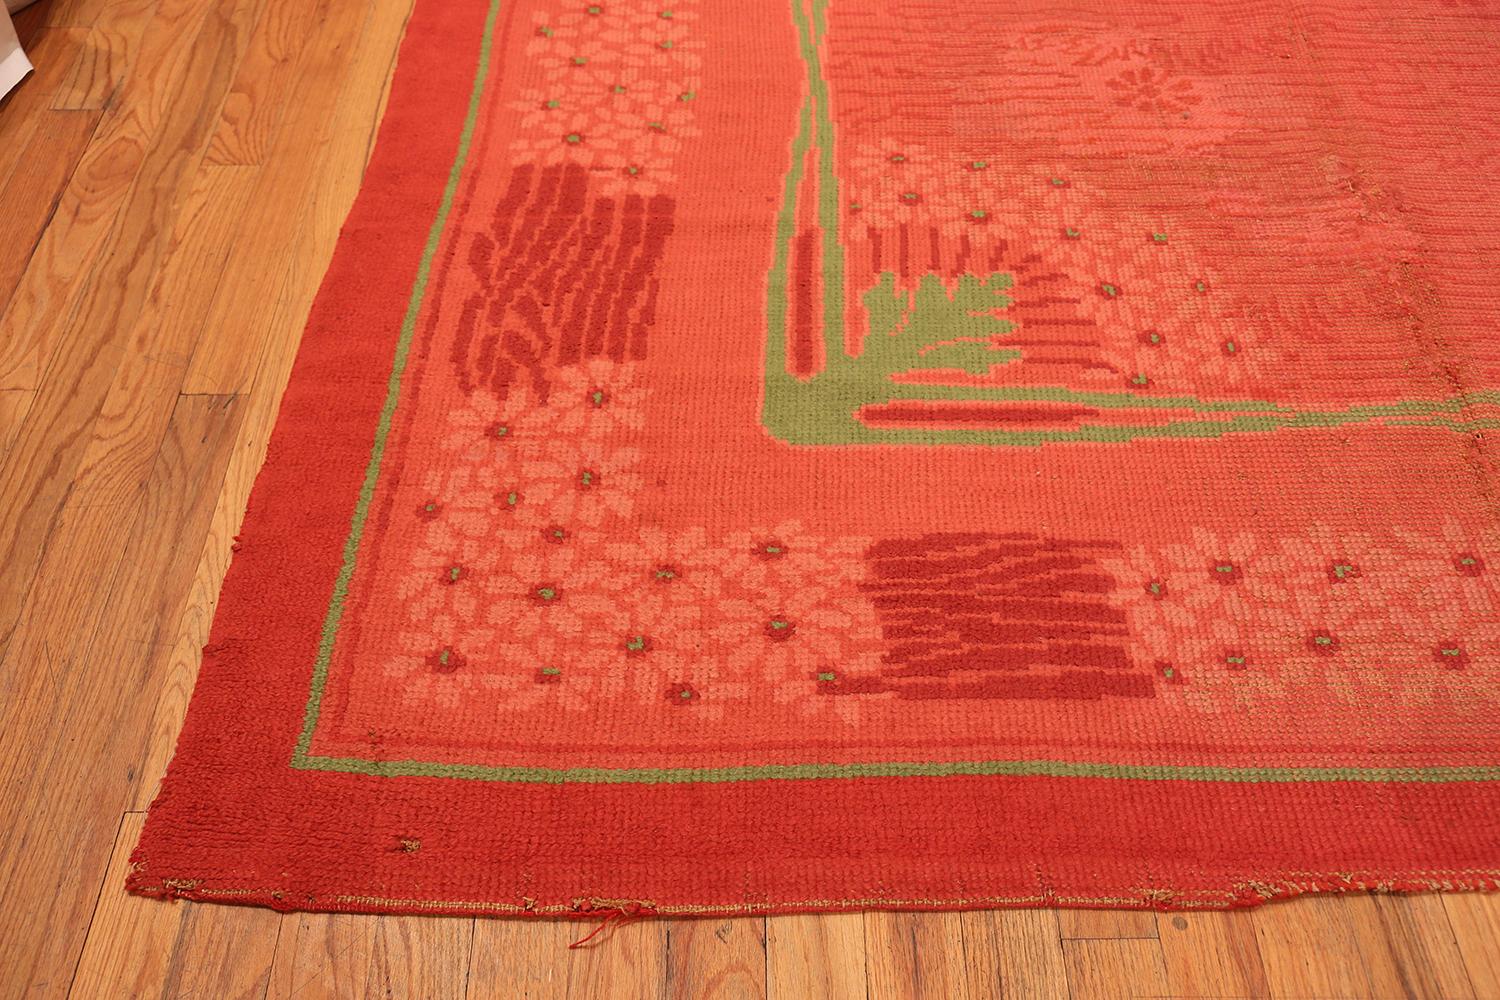 Beautiful large size vintage French Art Nouveau rug, country of origin: France, date circa early 20th century. Size: 13 ft 3 in x 18 ft 7 in (4.04 m x 5.66 m)

A taut sinuous inner border of interlacing vines with small palmettes is Classic Art